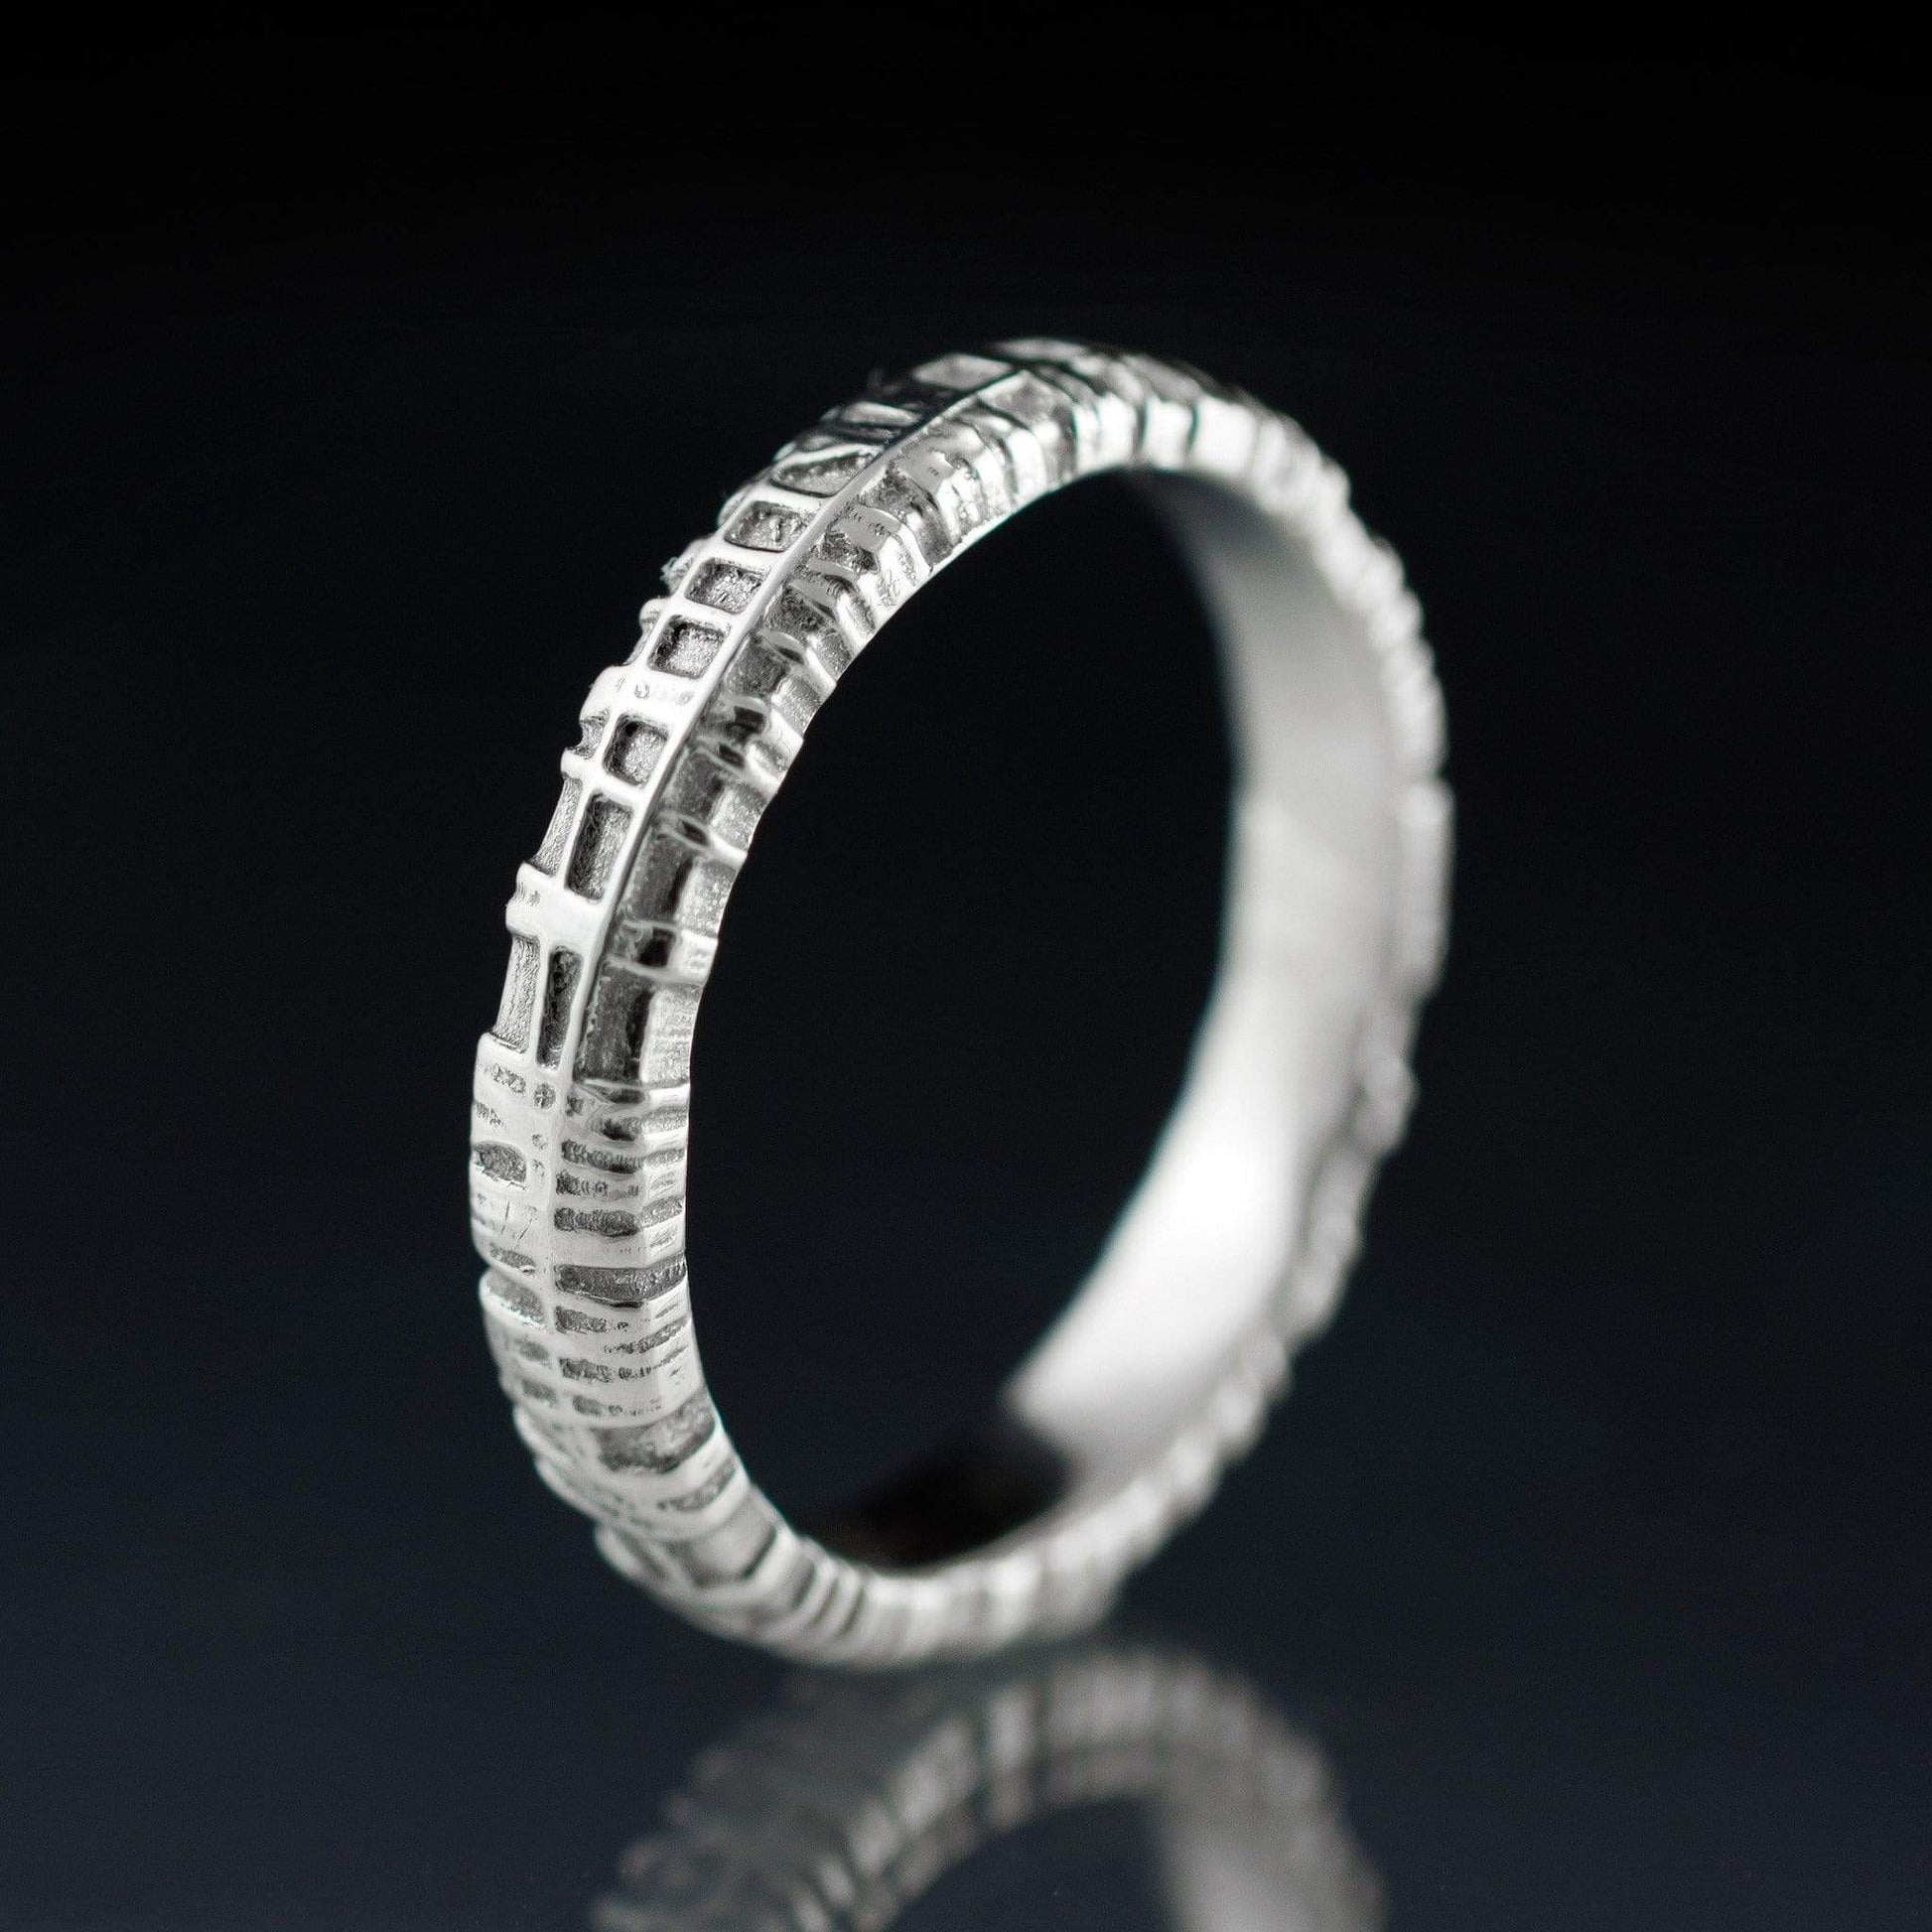 Narrow Woven Texture Wedding Band 14k Nickel White Gold / 2.5 Ring by Nodeform